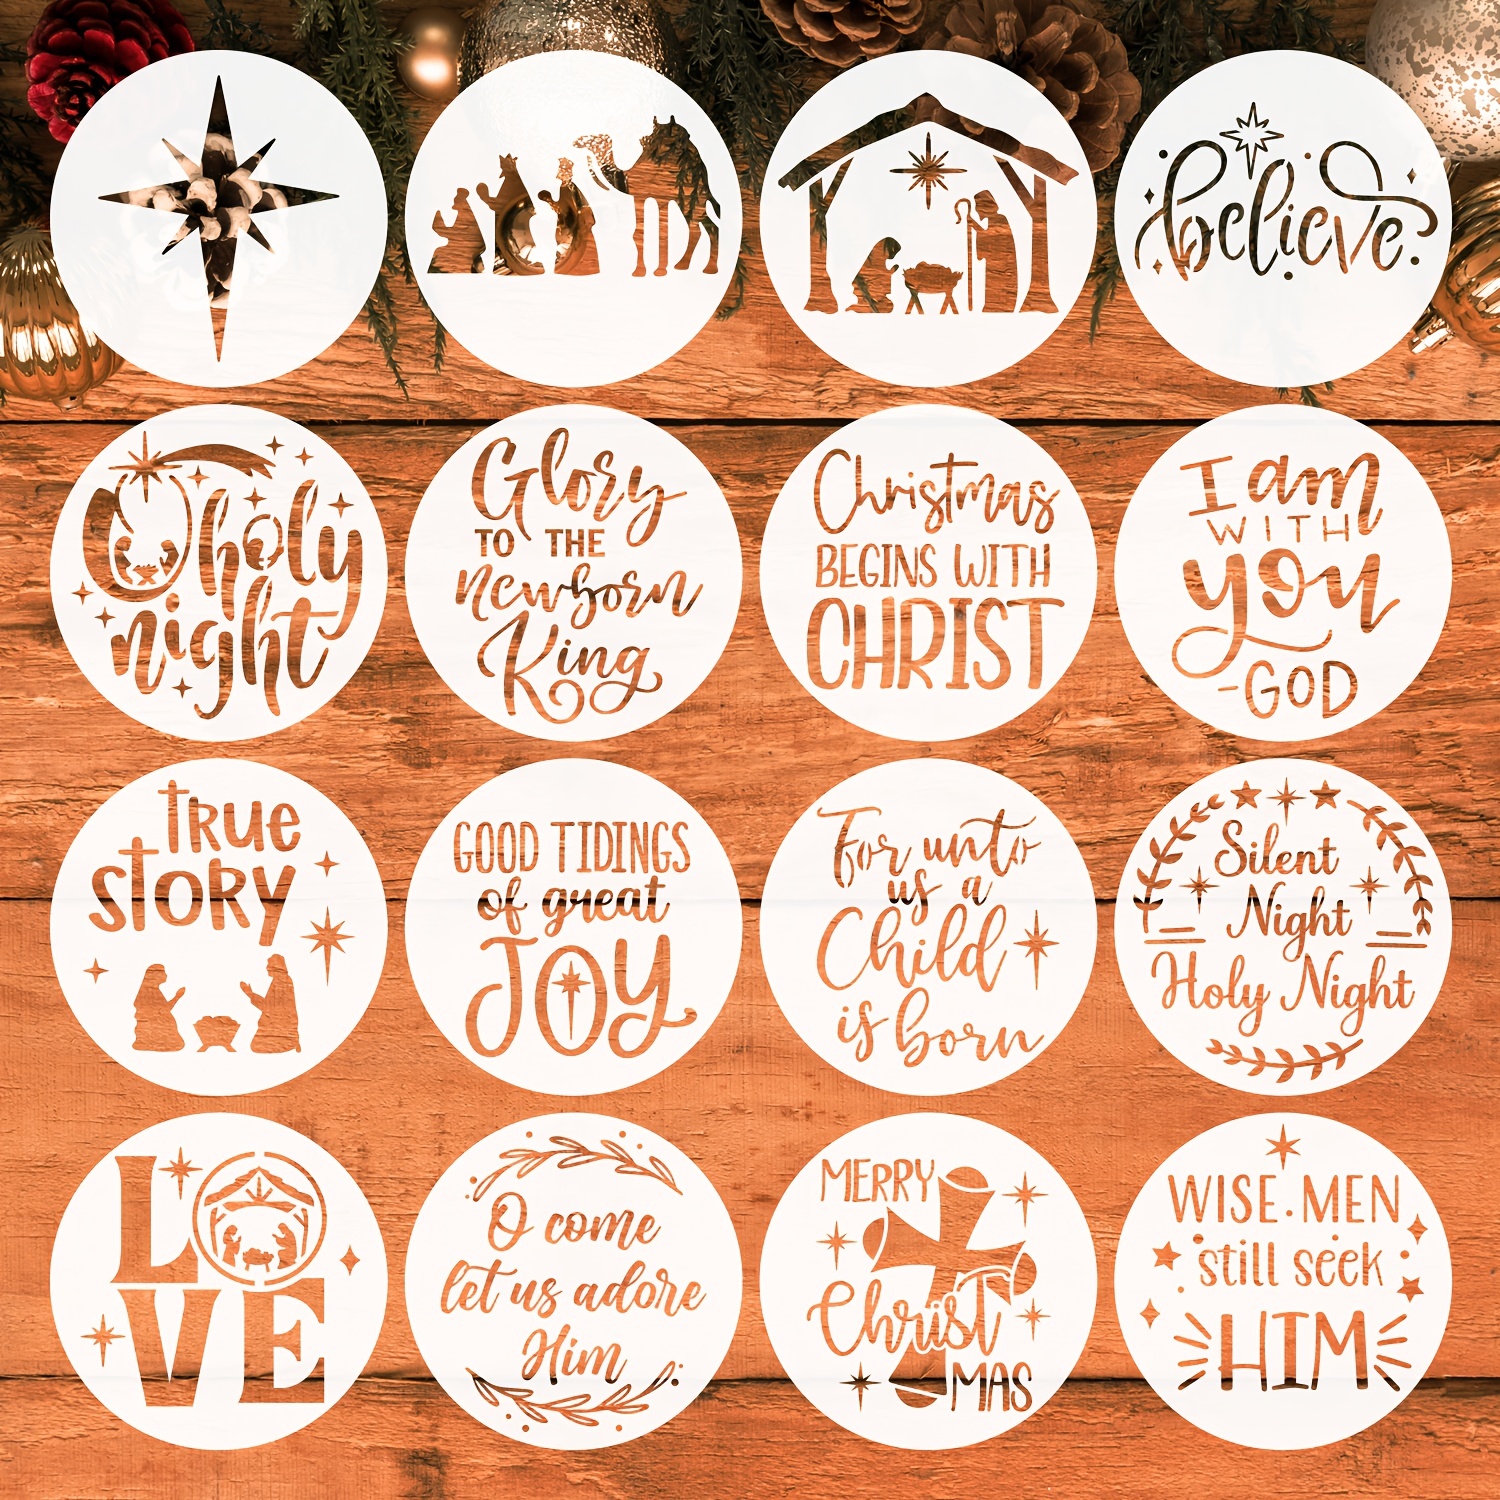 Christmas Stencils for Ornaments Stencils for Painting on Wood Small Cookie  Mini Face Christmas Stencils for Crafts Supplies Glass Christmas Tree